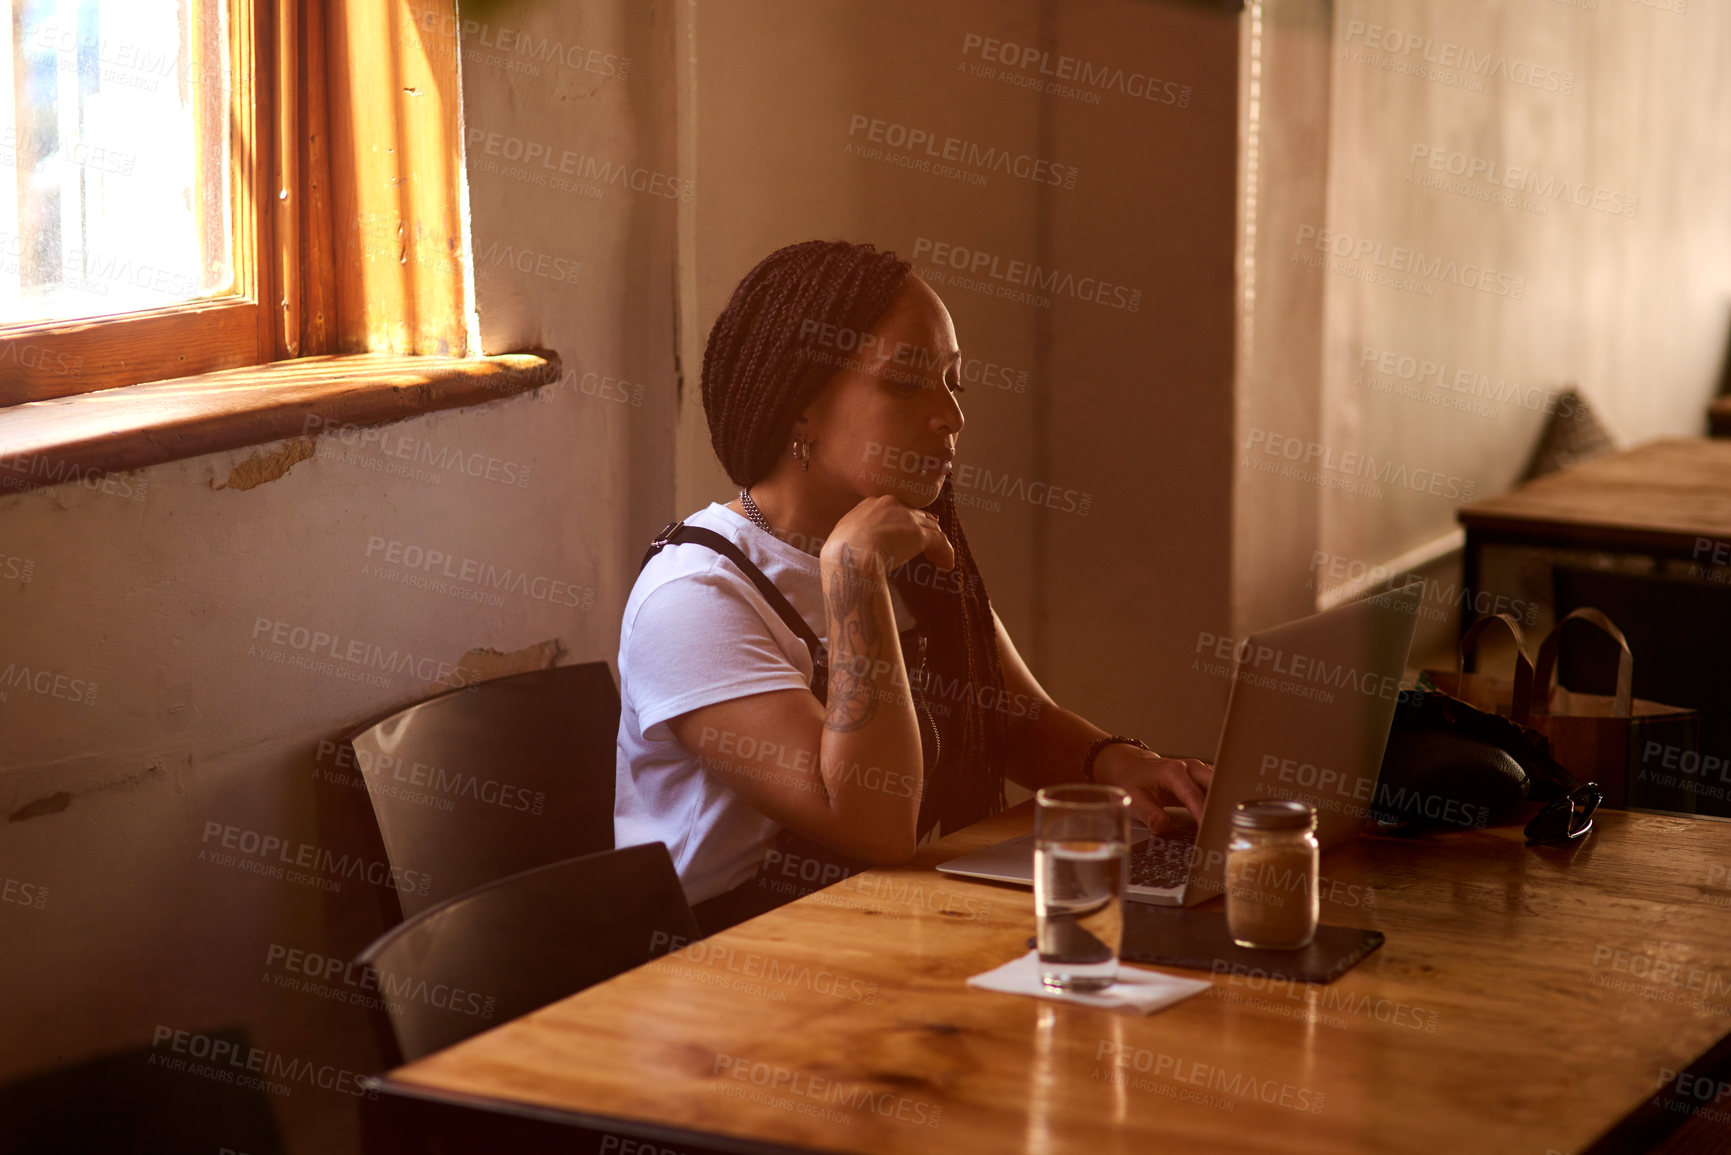 Buy stock photo Shot of an attractive young woman using her laptop while relaxing inside a local cafe